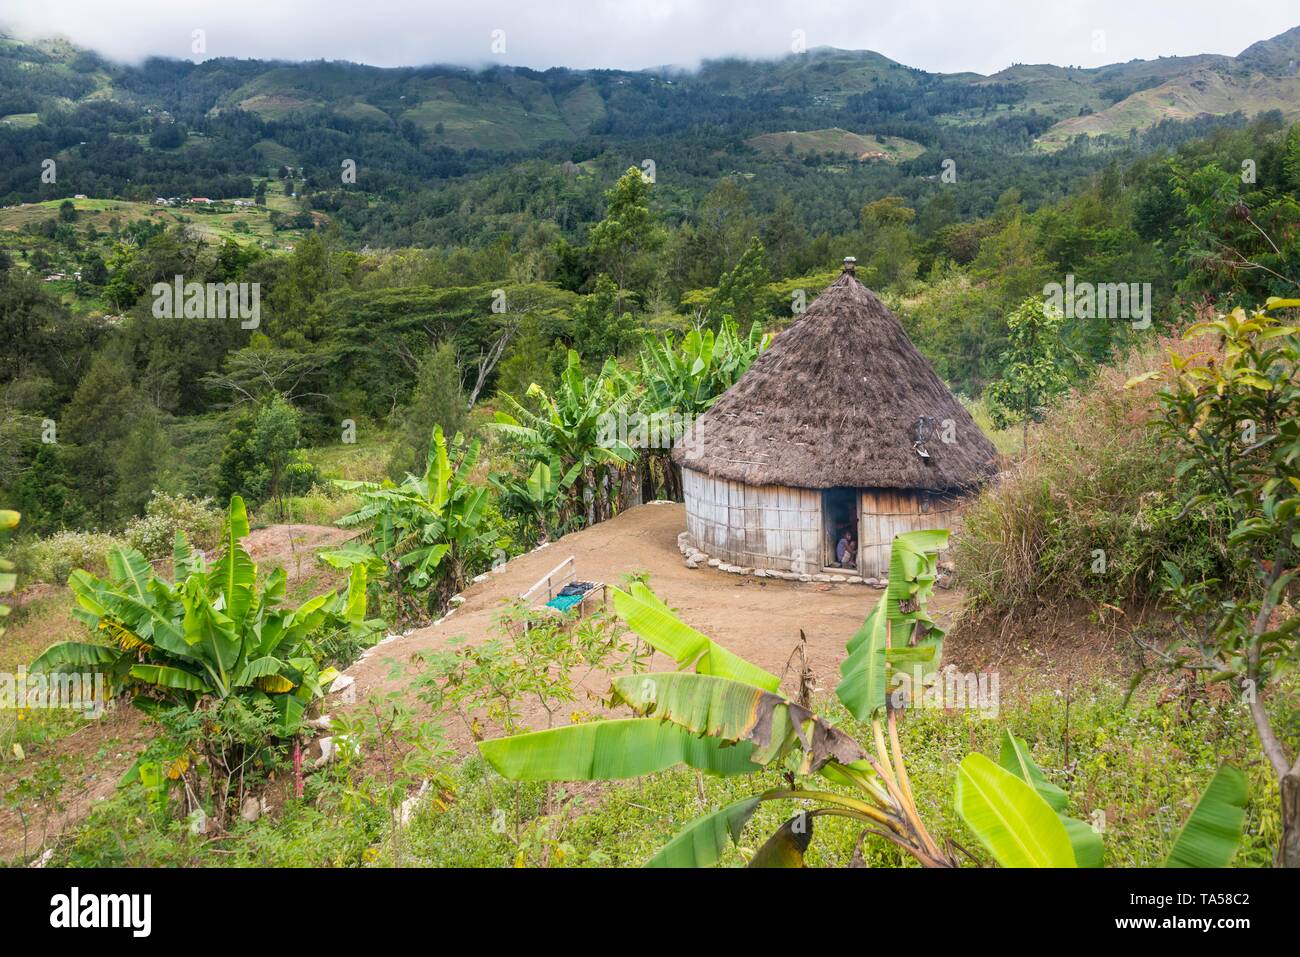 Traditional reed hut with banana plants around in the mountains of Maubisse, East Timor Stock Photo